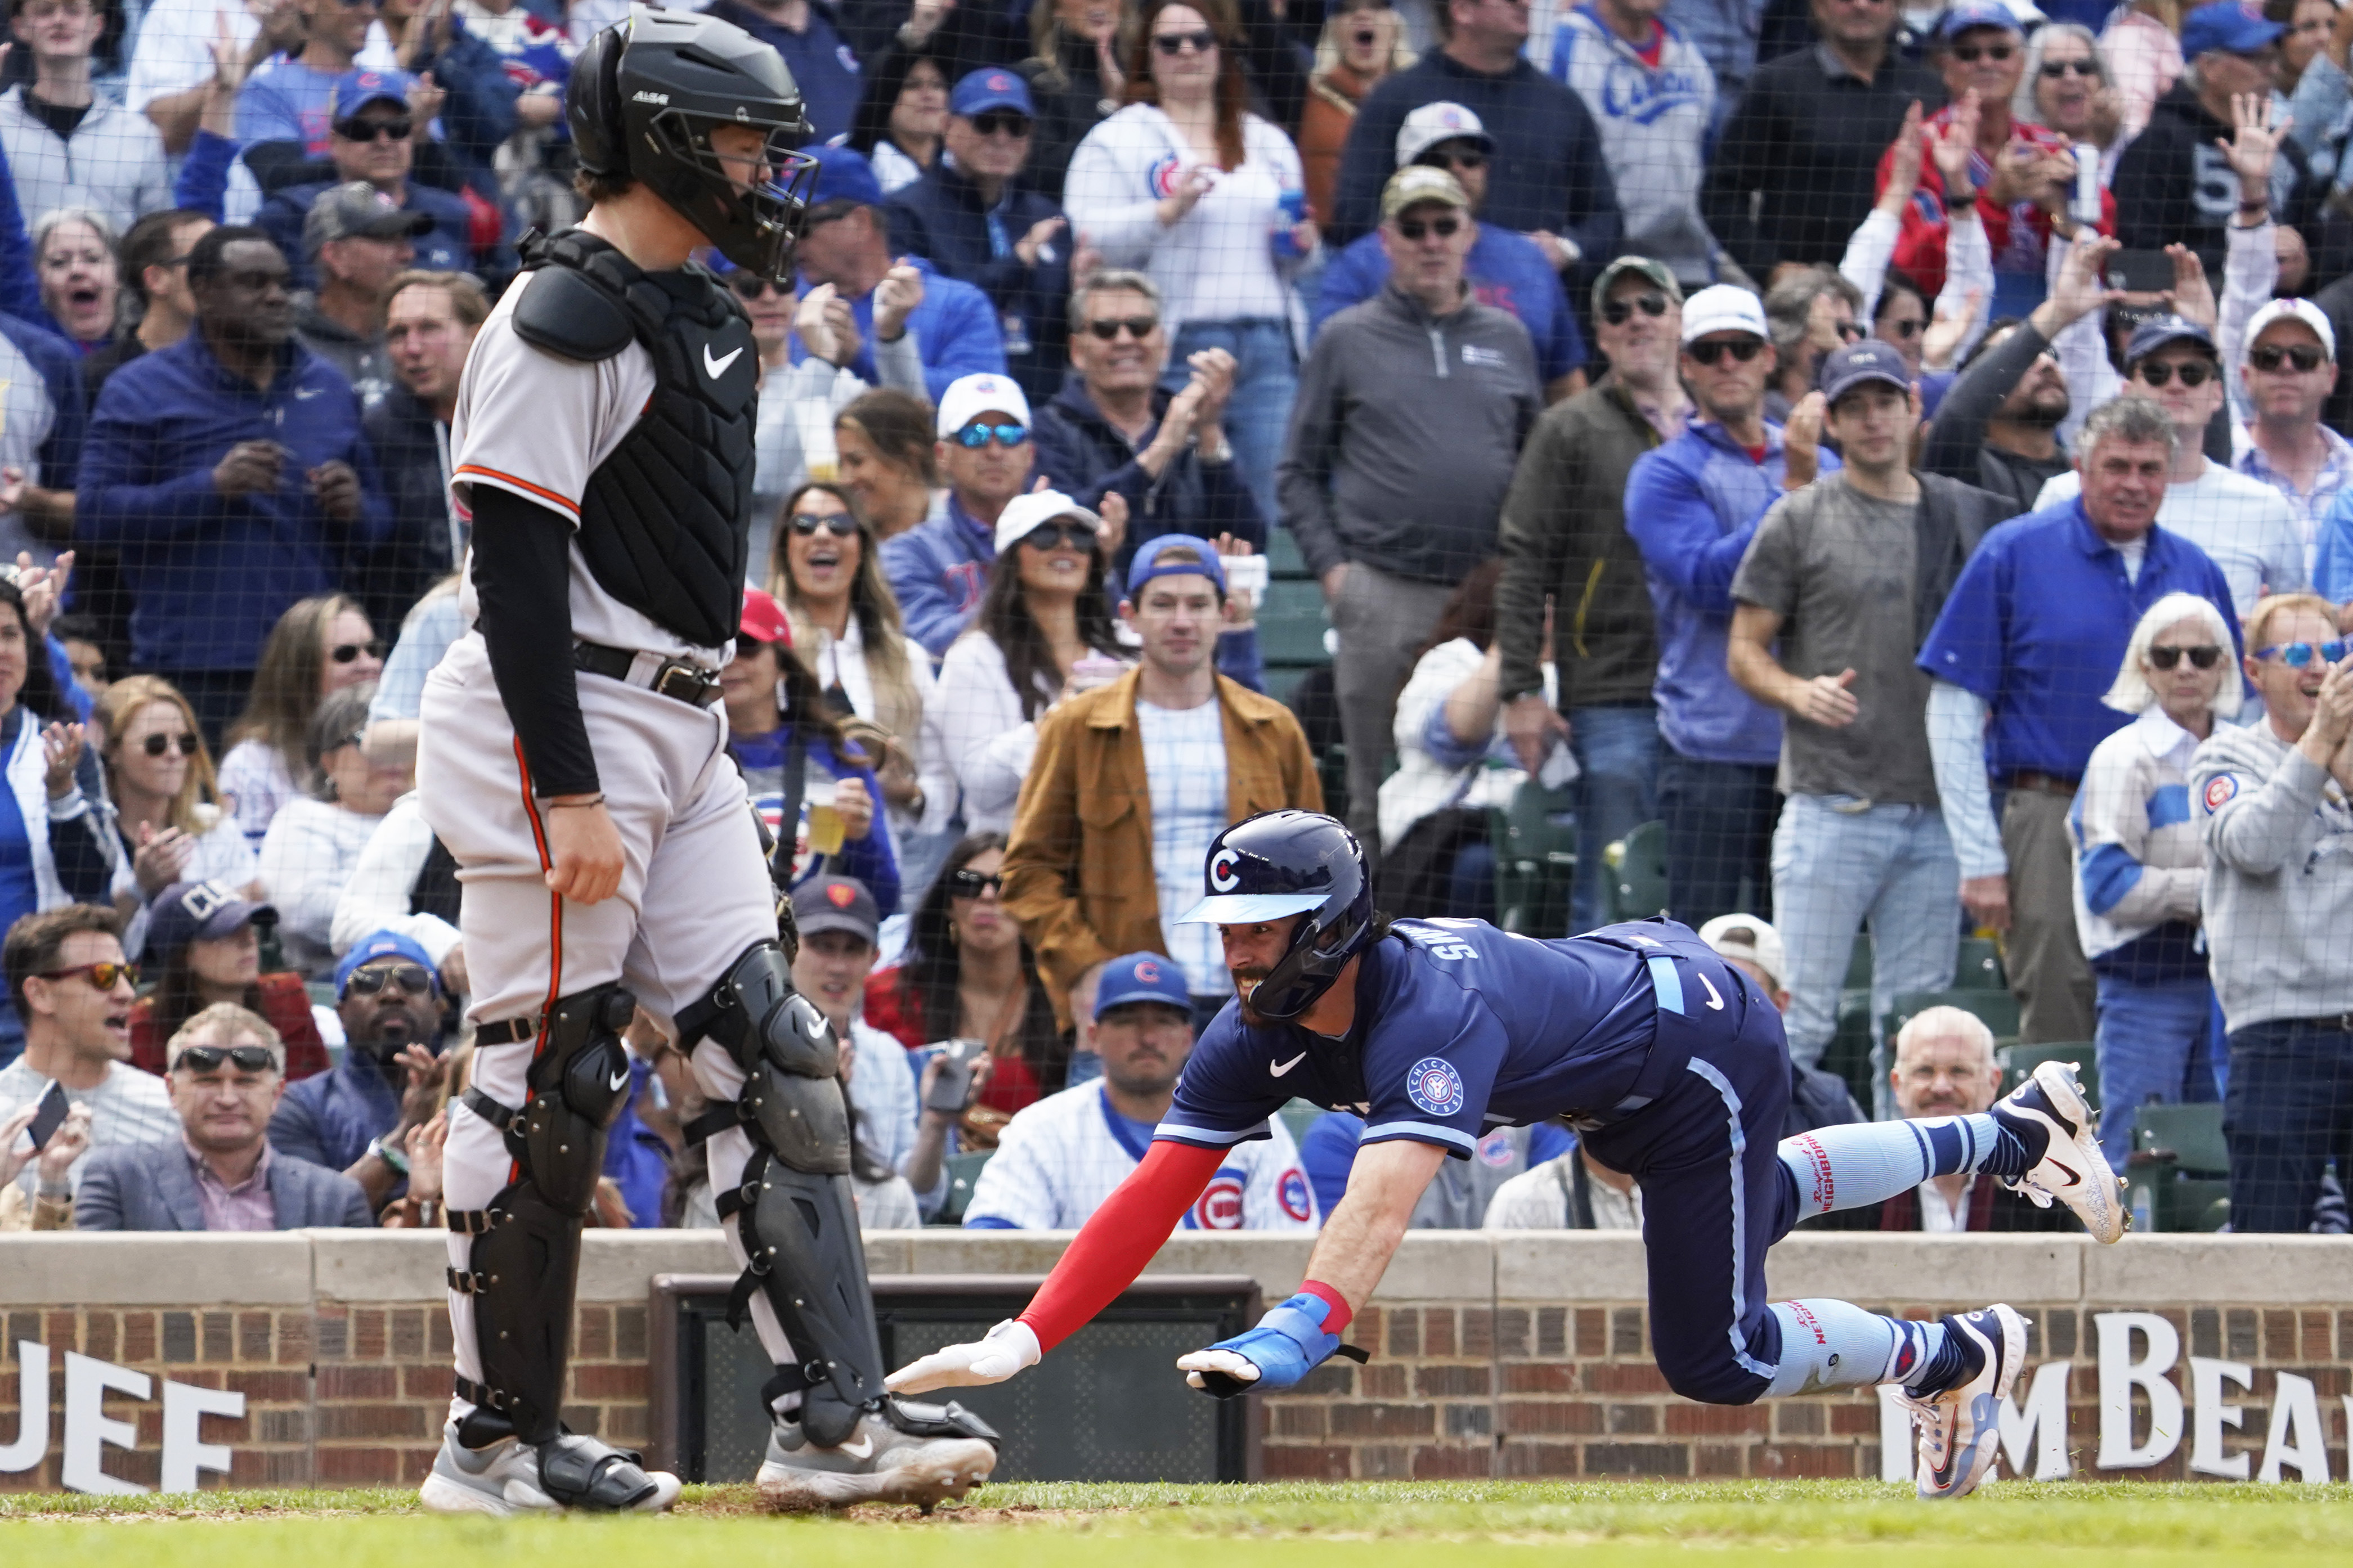 Christopher Morel homers as Chicago Cubs beat Baltimore Orioles 10-3 for  4th straight win - WTOP News